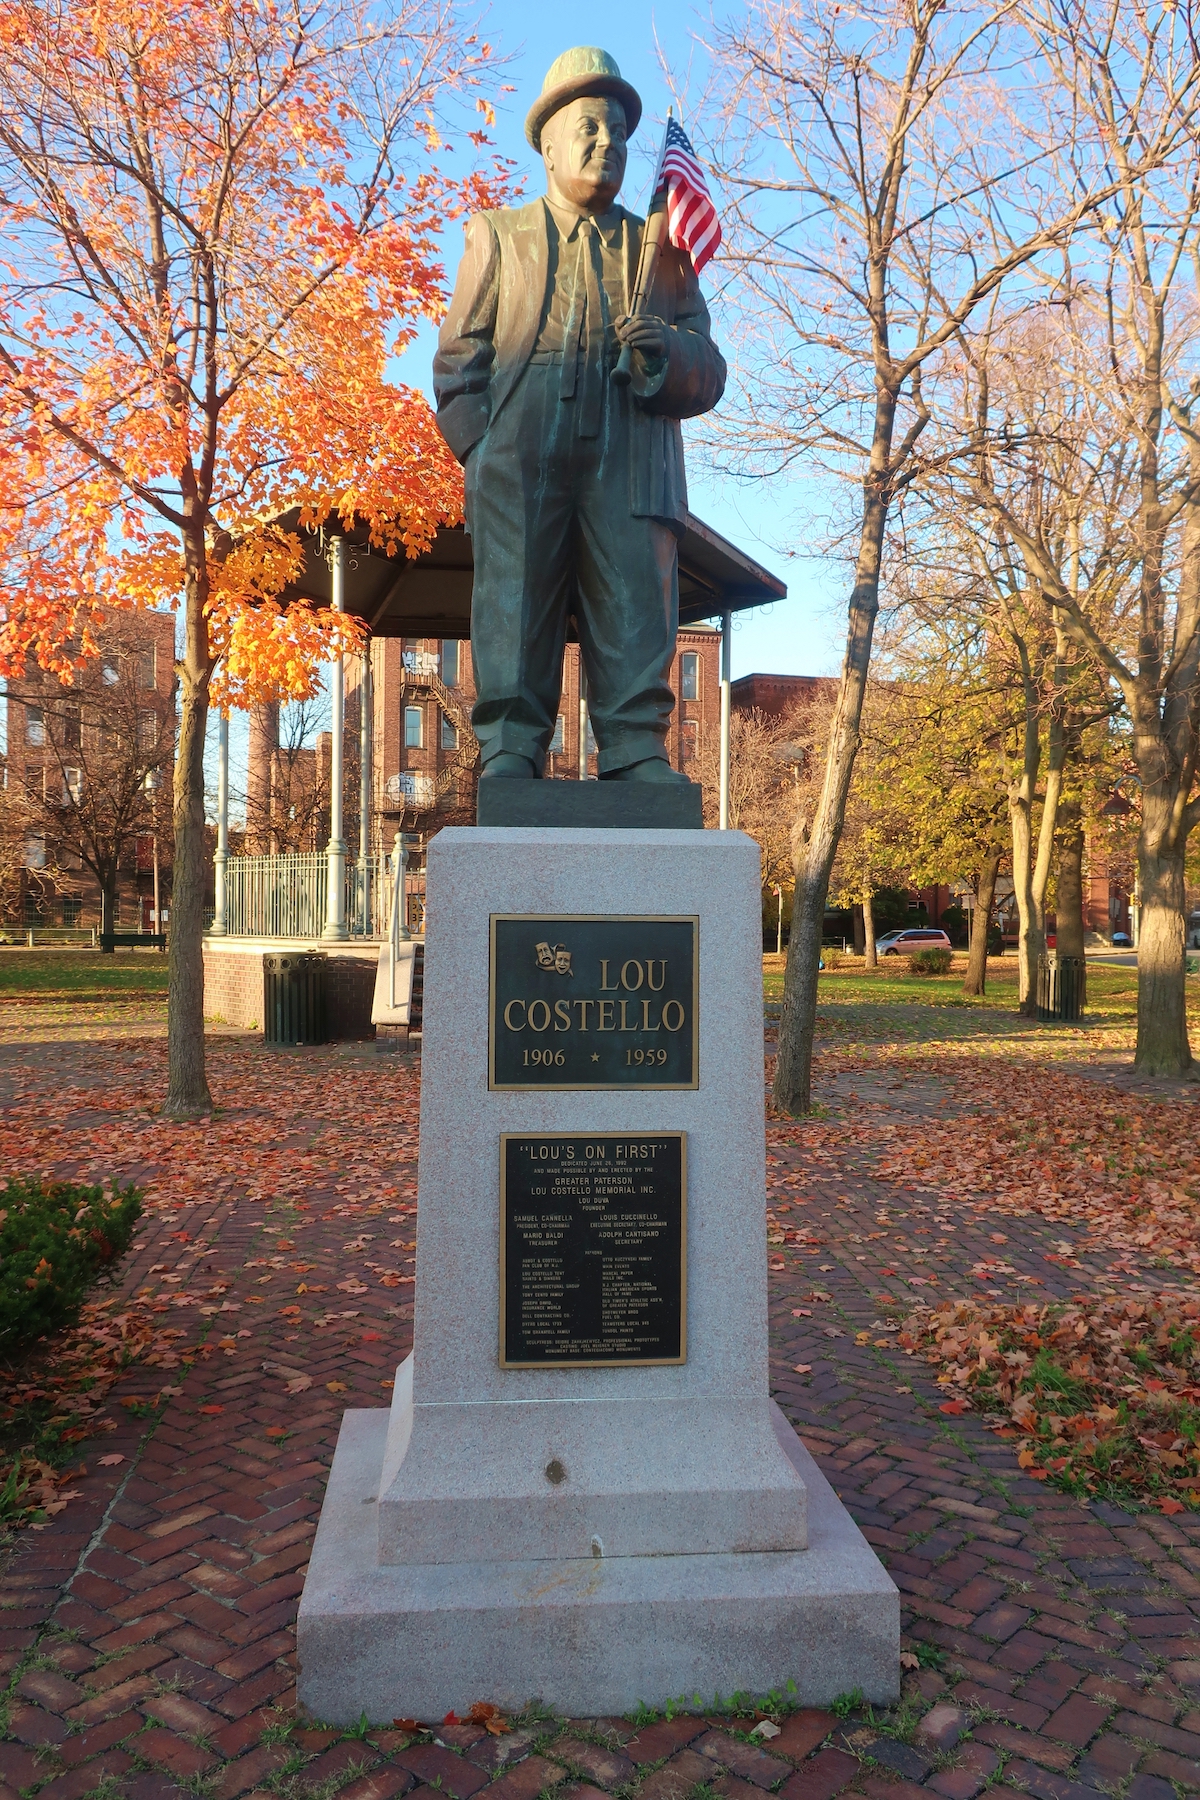 Statue of a man with a real American flag in his hand, seen in a park on a fall day